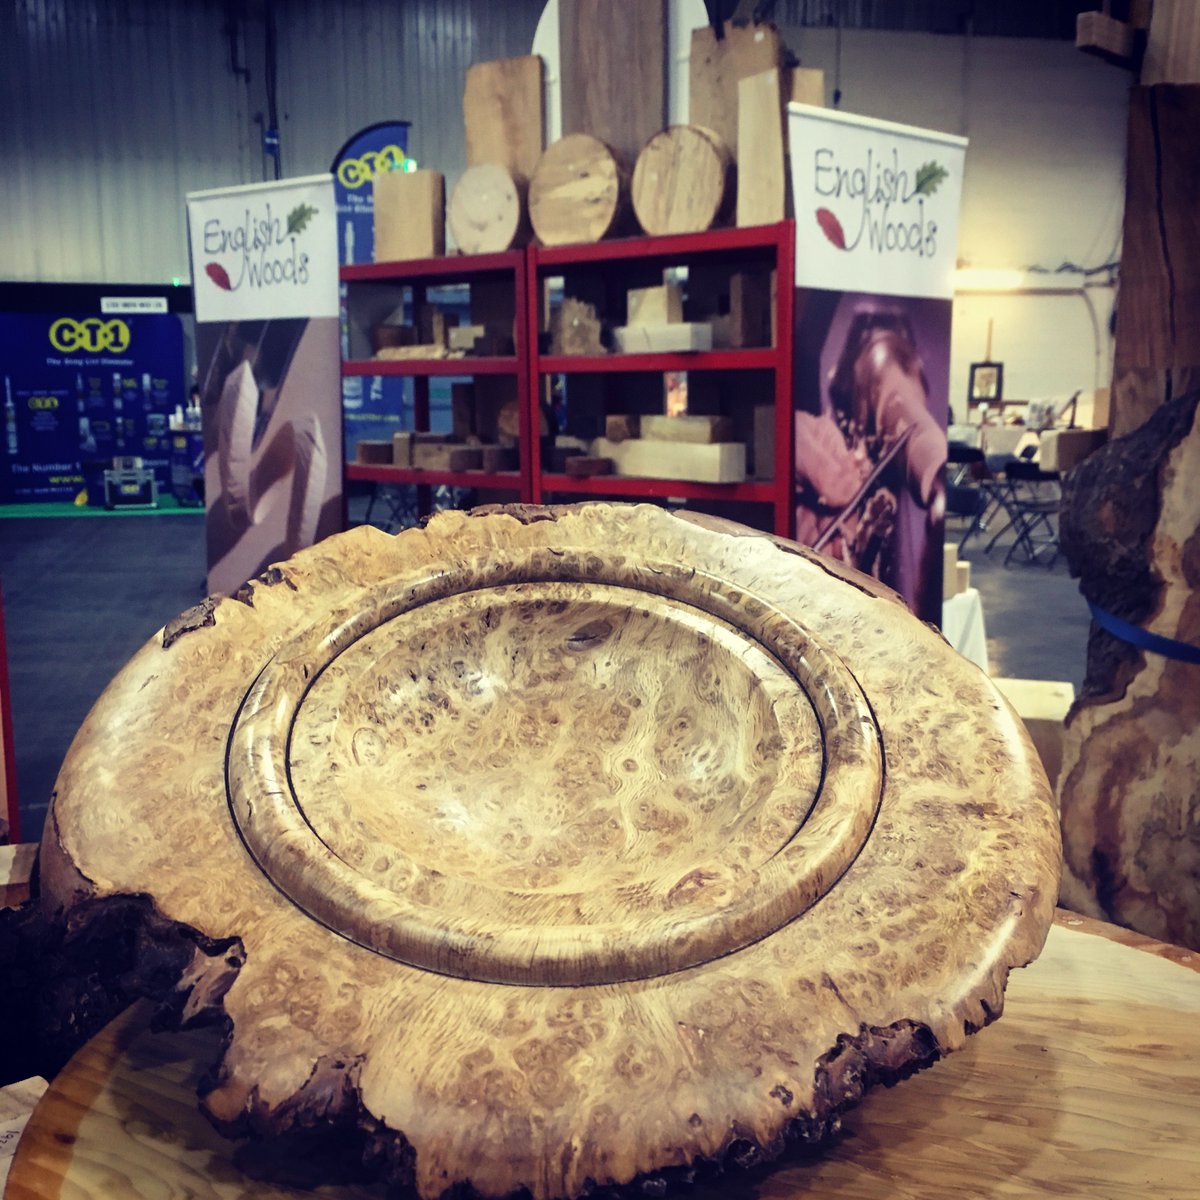 Making the most of English Oak Burrs/Burrls. We have loads of these burrs for sale - just get in touch.

#woodturner #woodturning #wood #woodturned #woodturnersofinstagram #woodwork_feature  #woodworking #woodisgood #woodtable  #woodart #woodartisan #woodartists #woodartistry